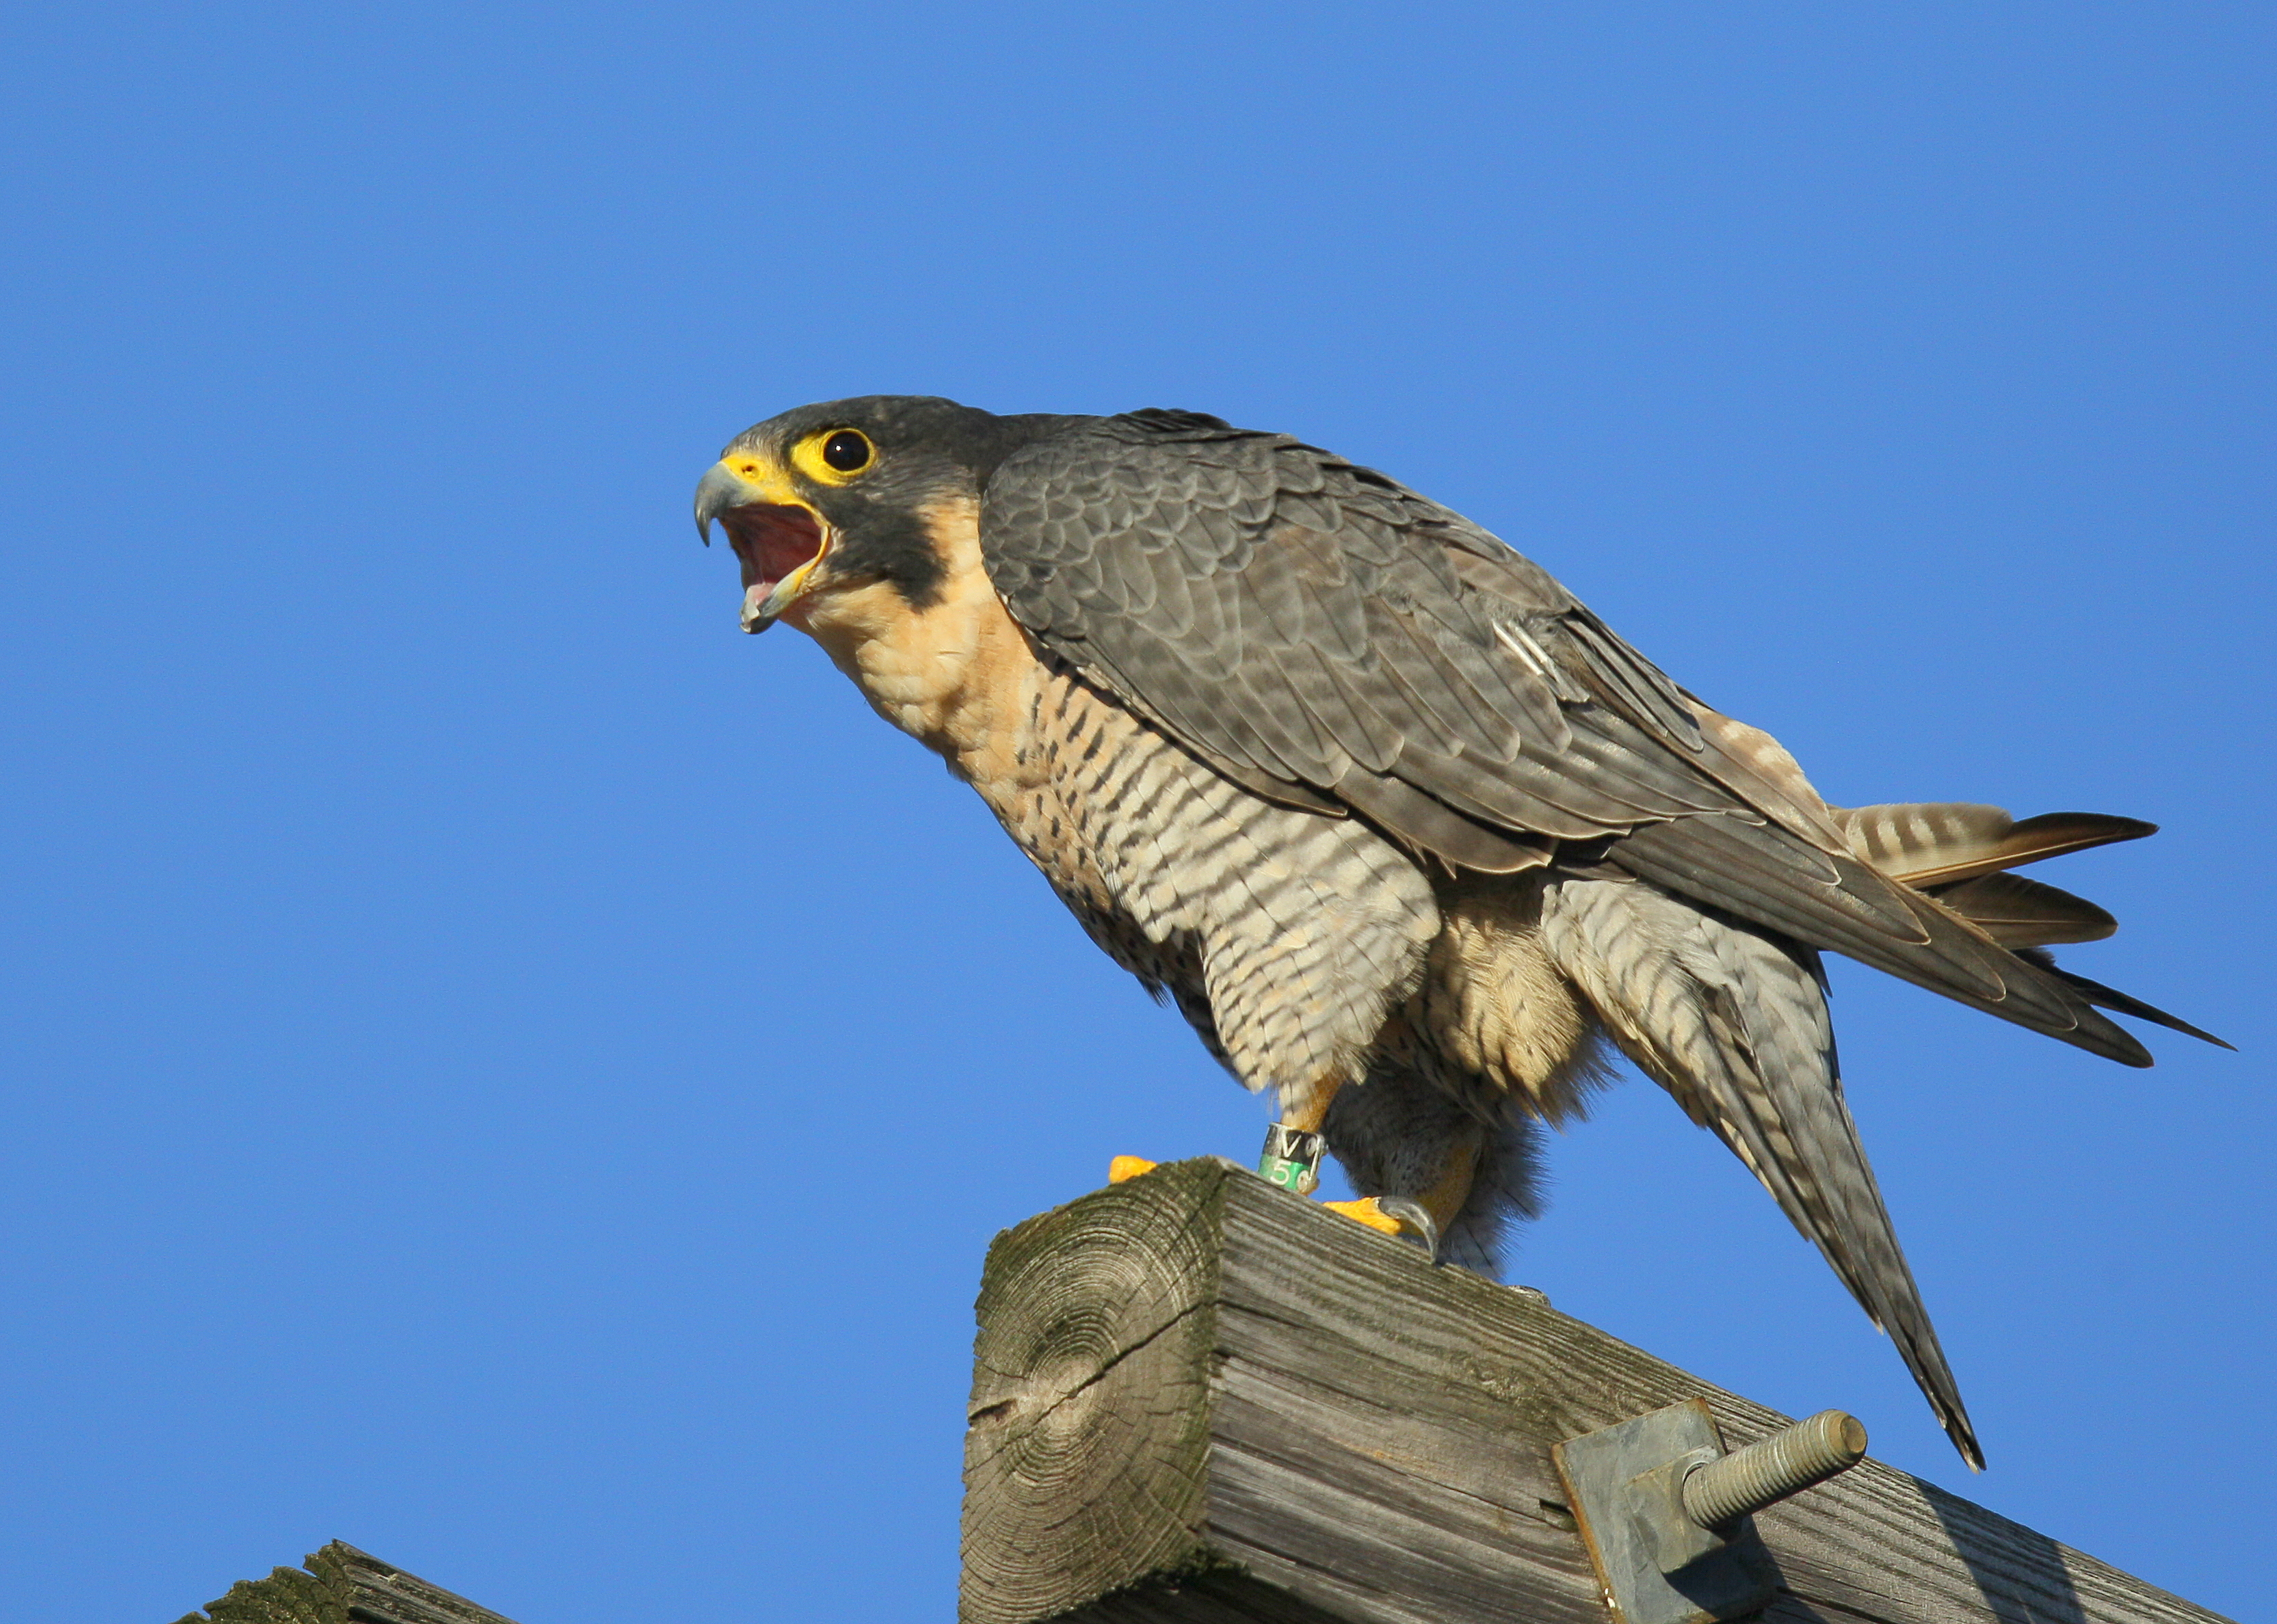 Peregrine Falcon, adult female squawking at nearby male